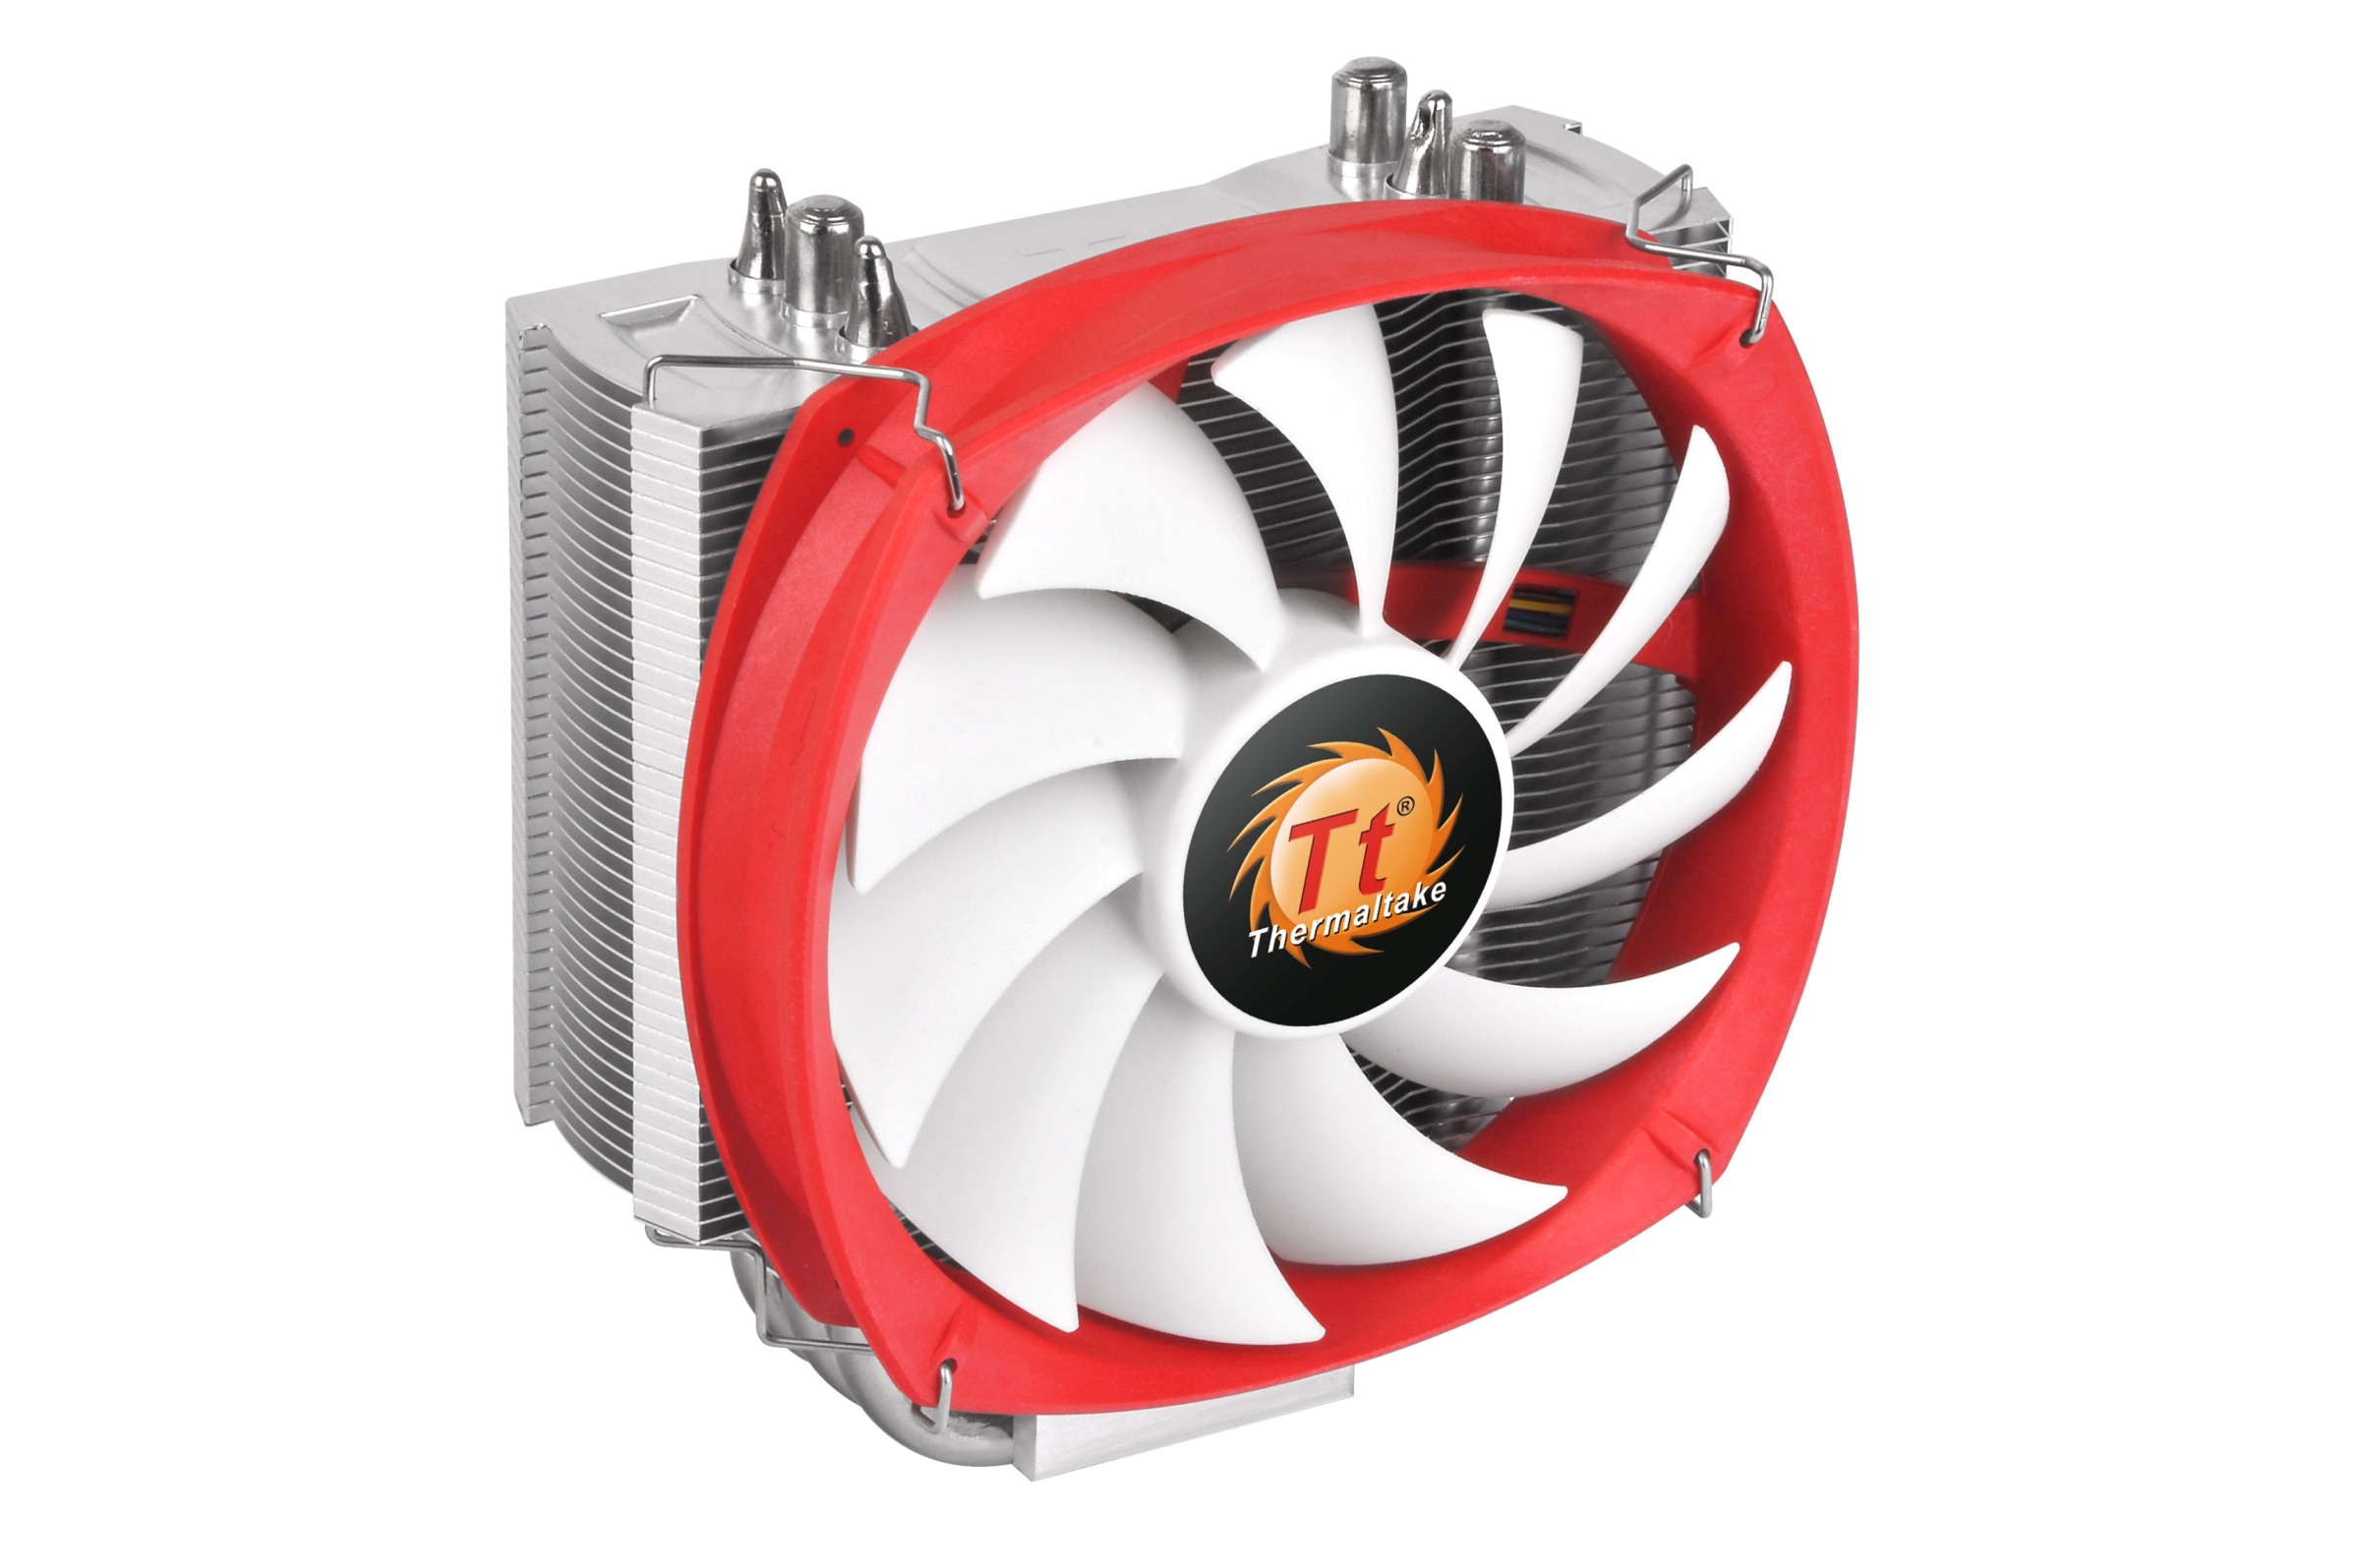 Thermaltake Release NiC L31L32 Non interference Cooler